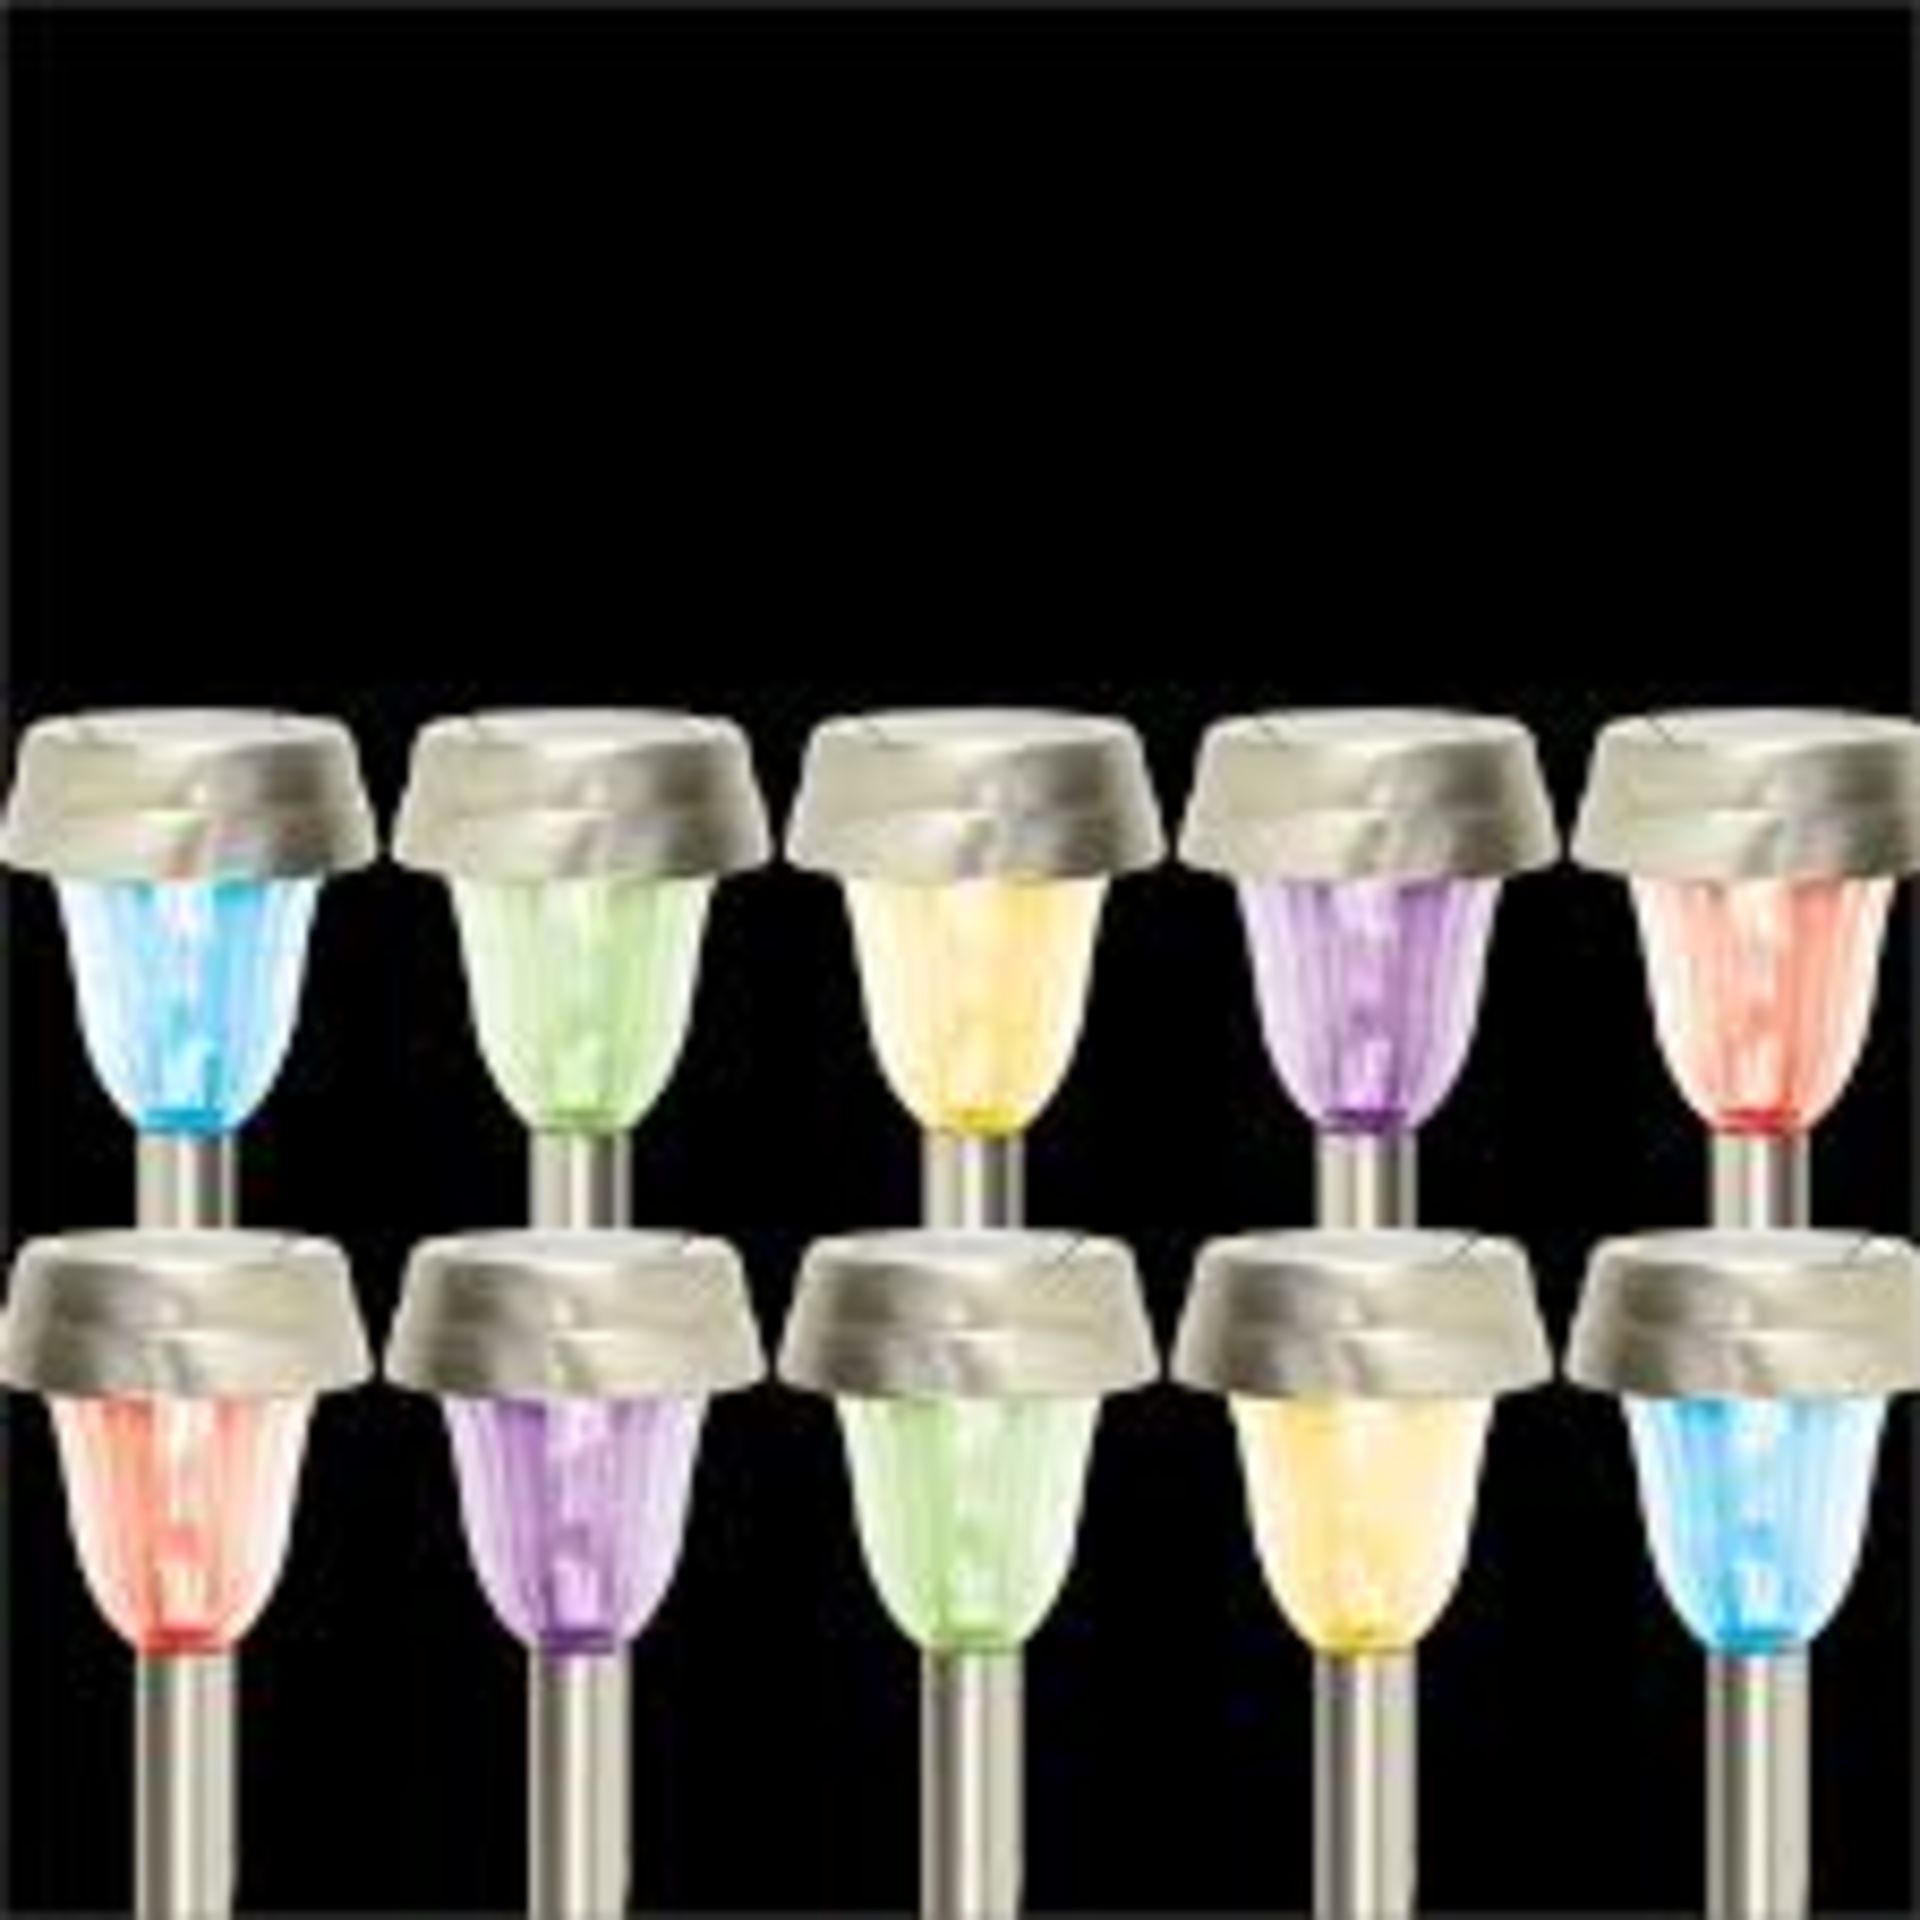 V Brand New Set of Six Stainless Steel Solar Colour Changing Lights SRP £19.99 (Image Varies